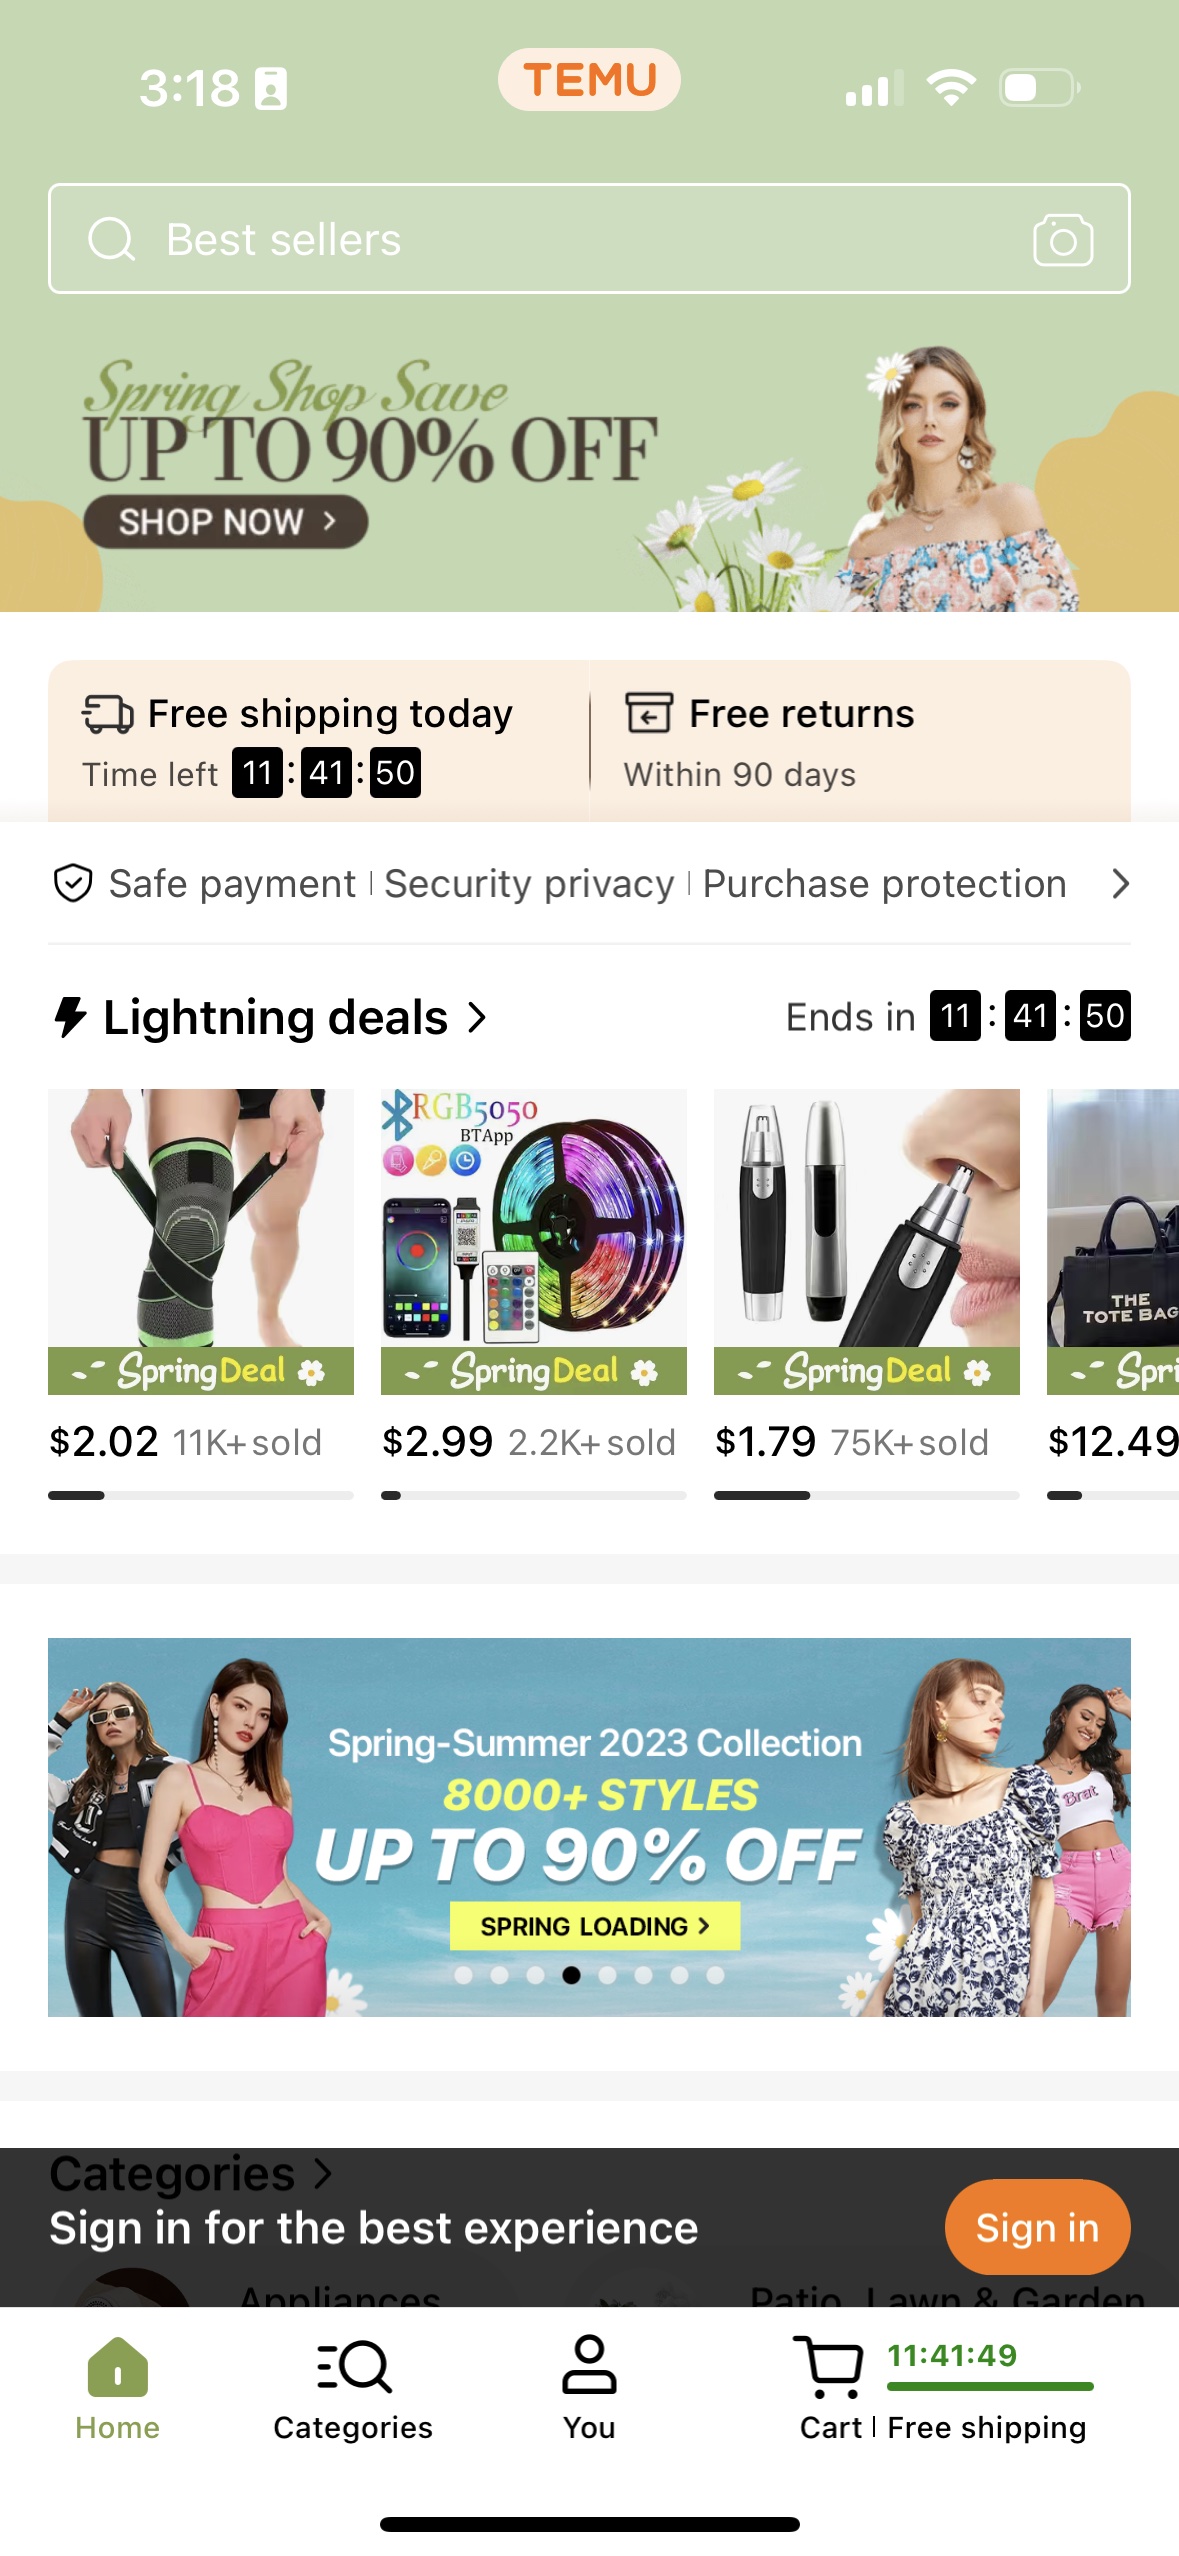 Temu shopping app offers low prices but some have safety concerns - Los  Angeles Times